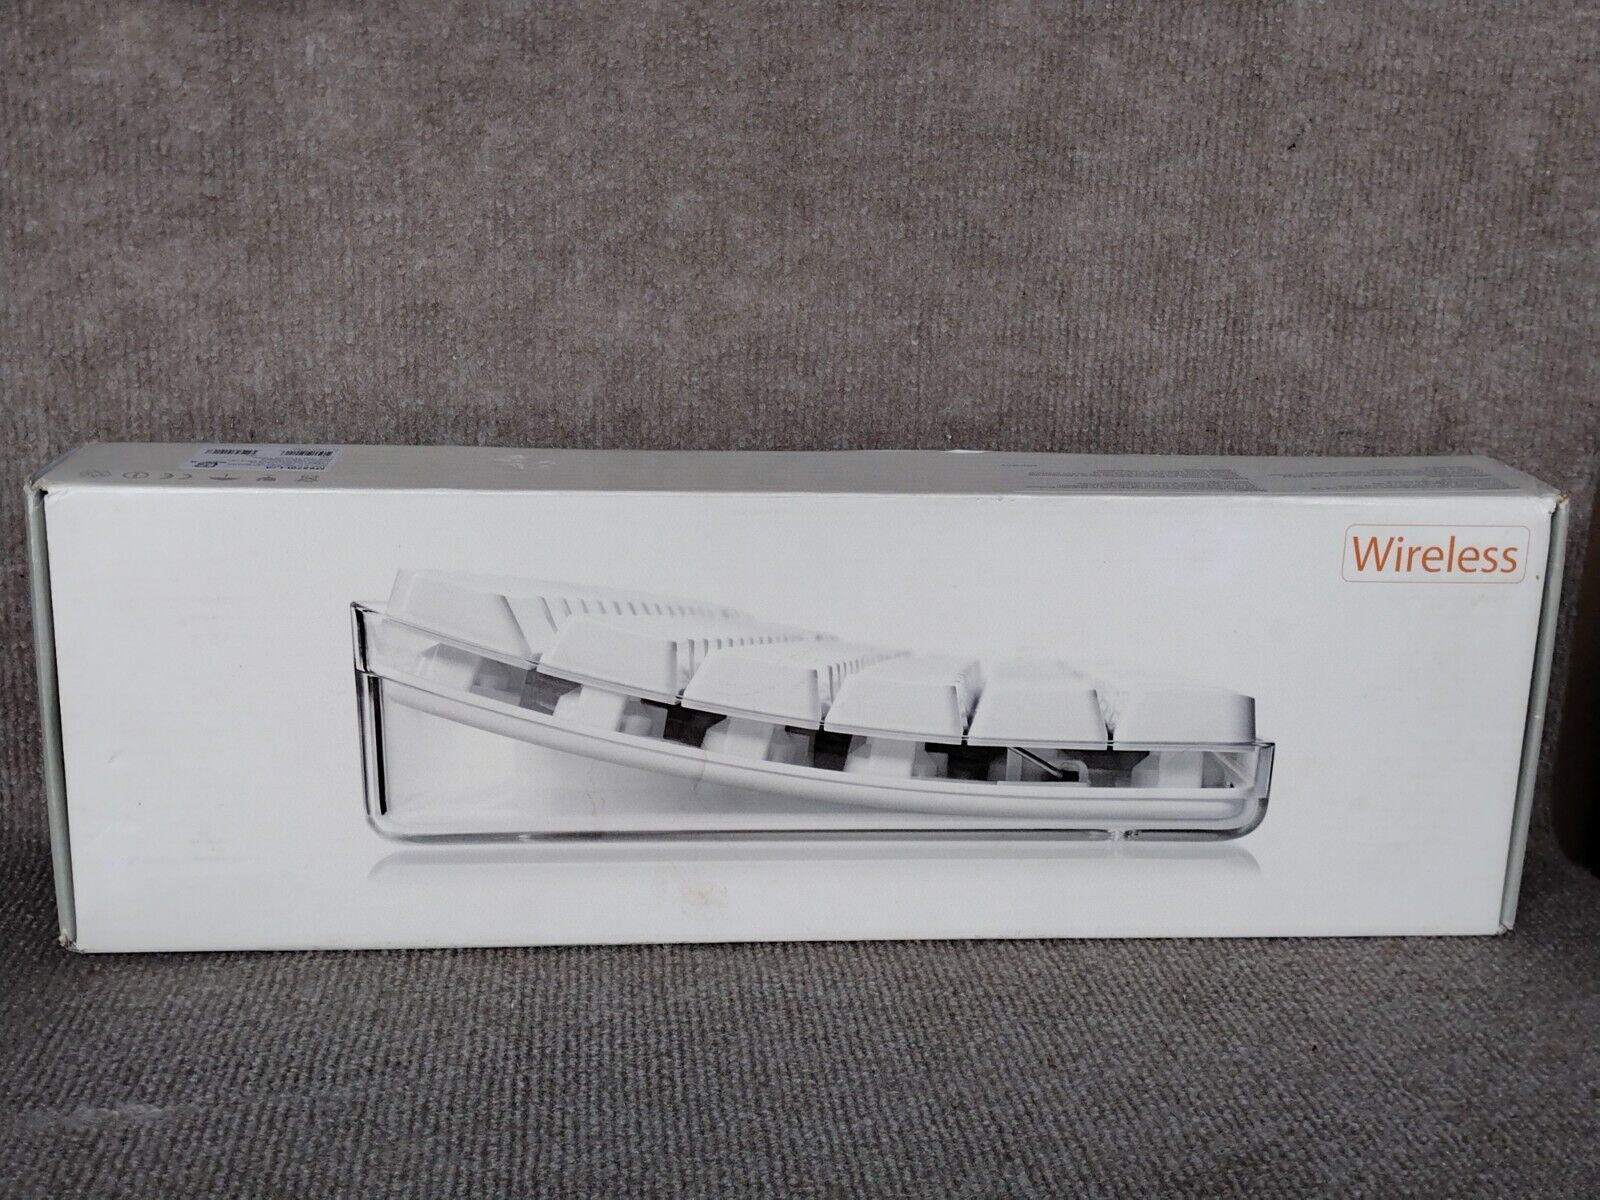 Vintage Rare Apple Wireless Keyboard for Mac M9270LL/A A1016 NEW OPEN BOX